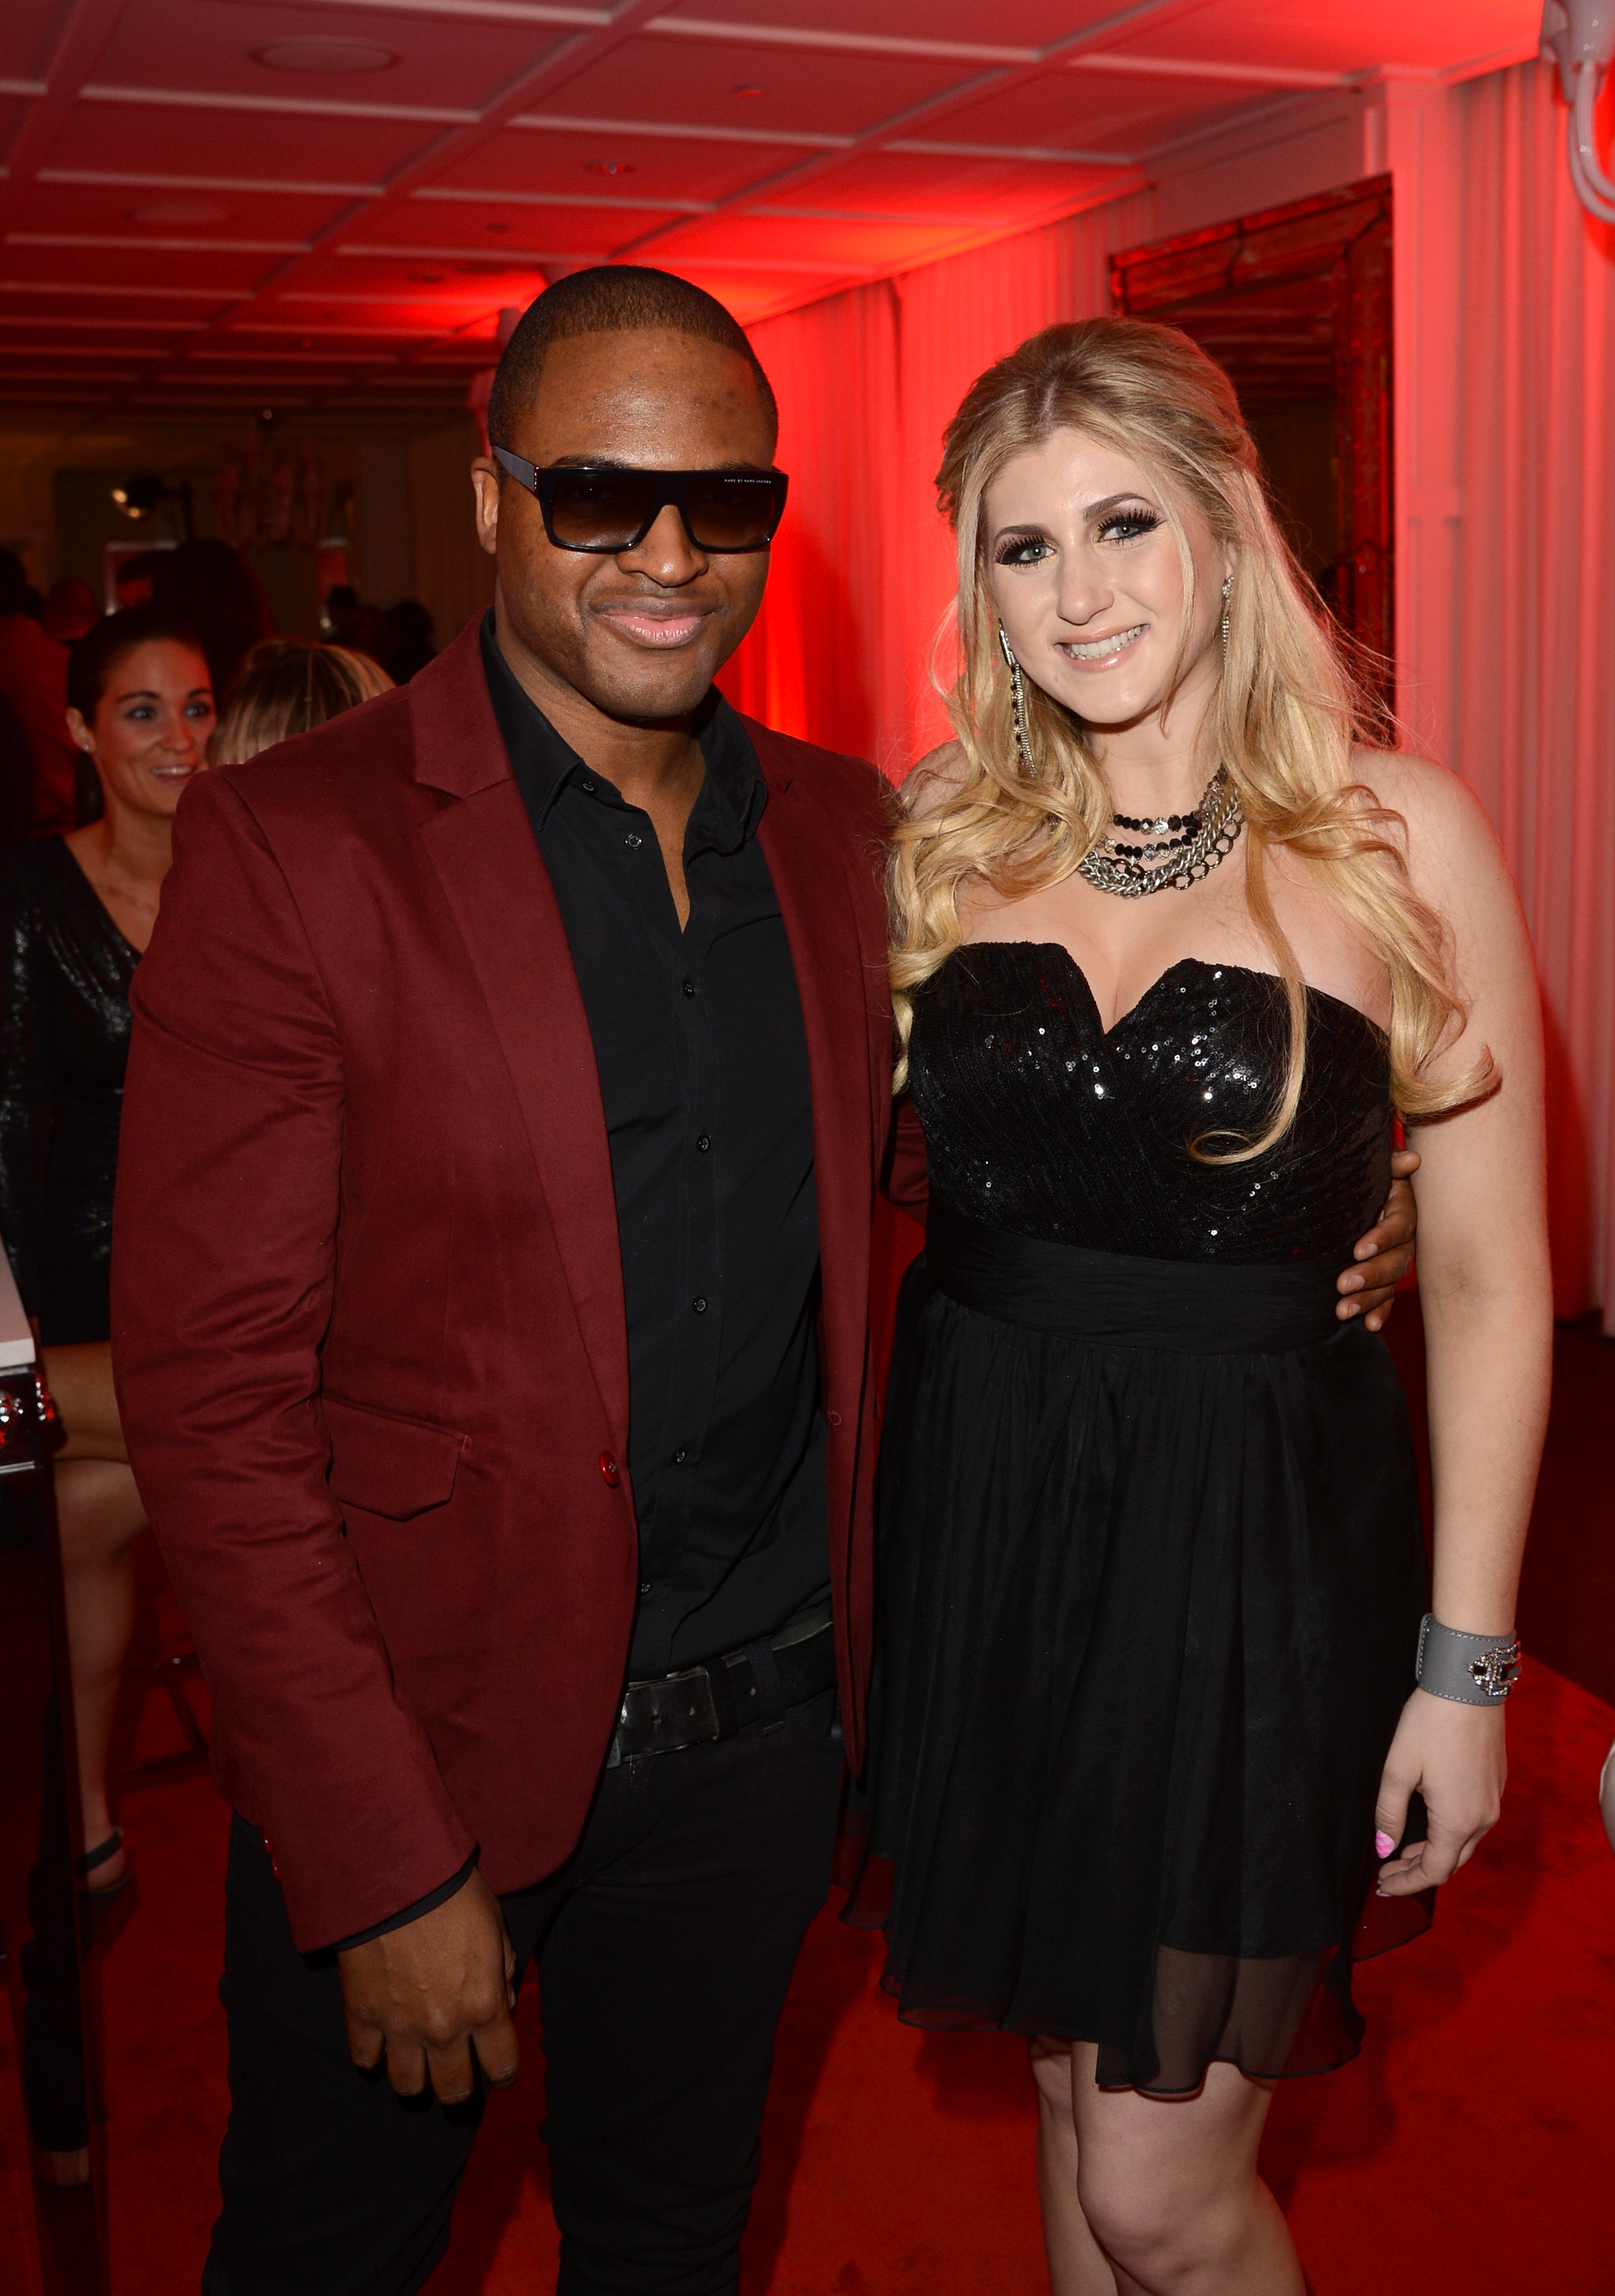 BEVERLY HILLS, CA - FEBRUARY 07:  Recording Artists Taio Cruz and Eva Universe attend Quattro Volte Vodka Preview with Taio Cruz at SLS Hotel on February 7, 2013 in Beverly Hills, California.  (Photo by Jason Merritt/WireImage)